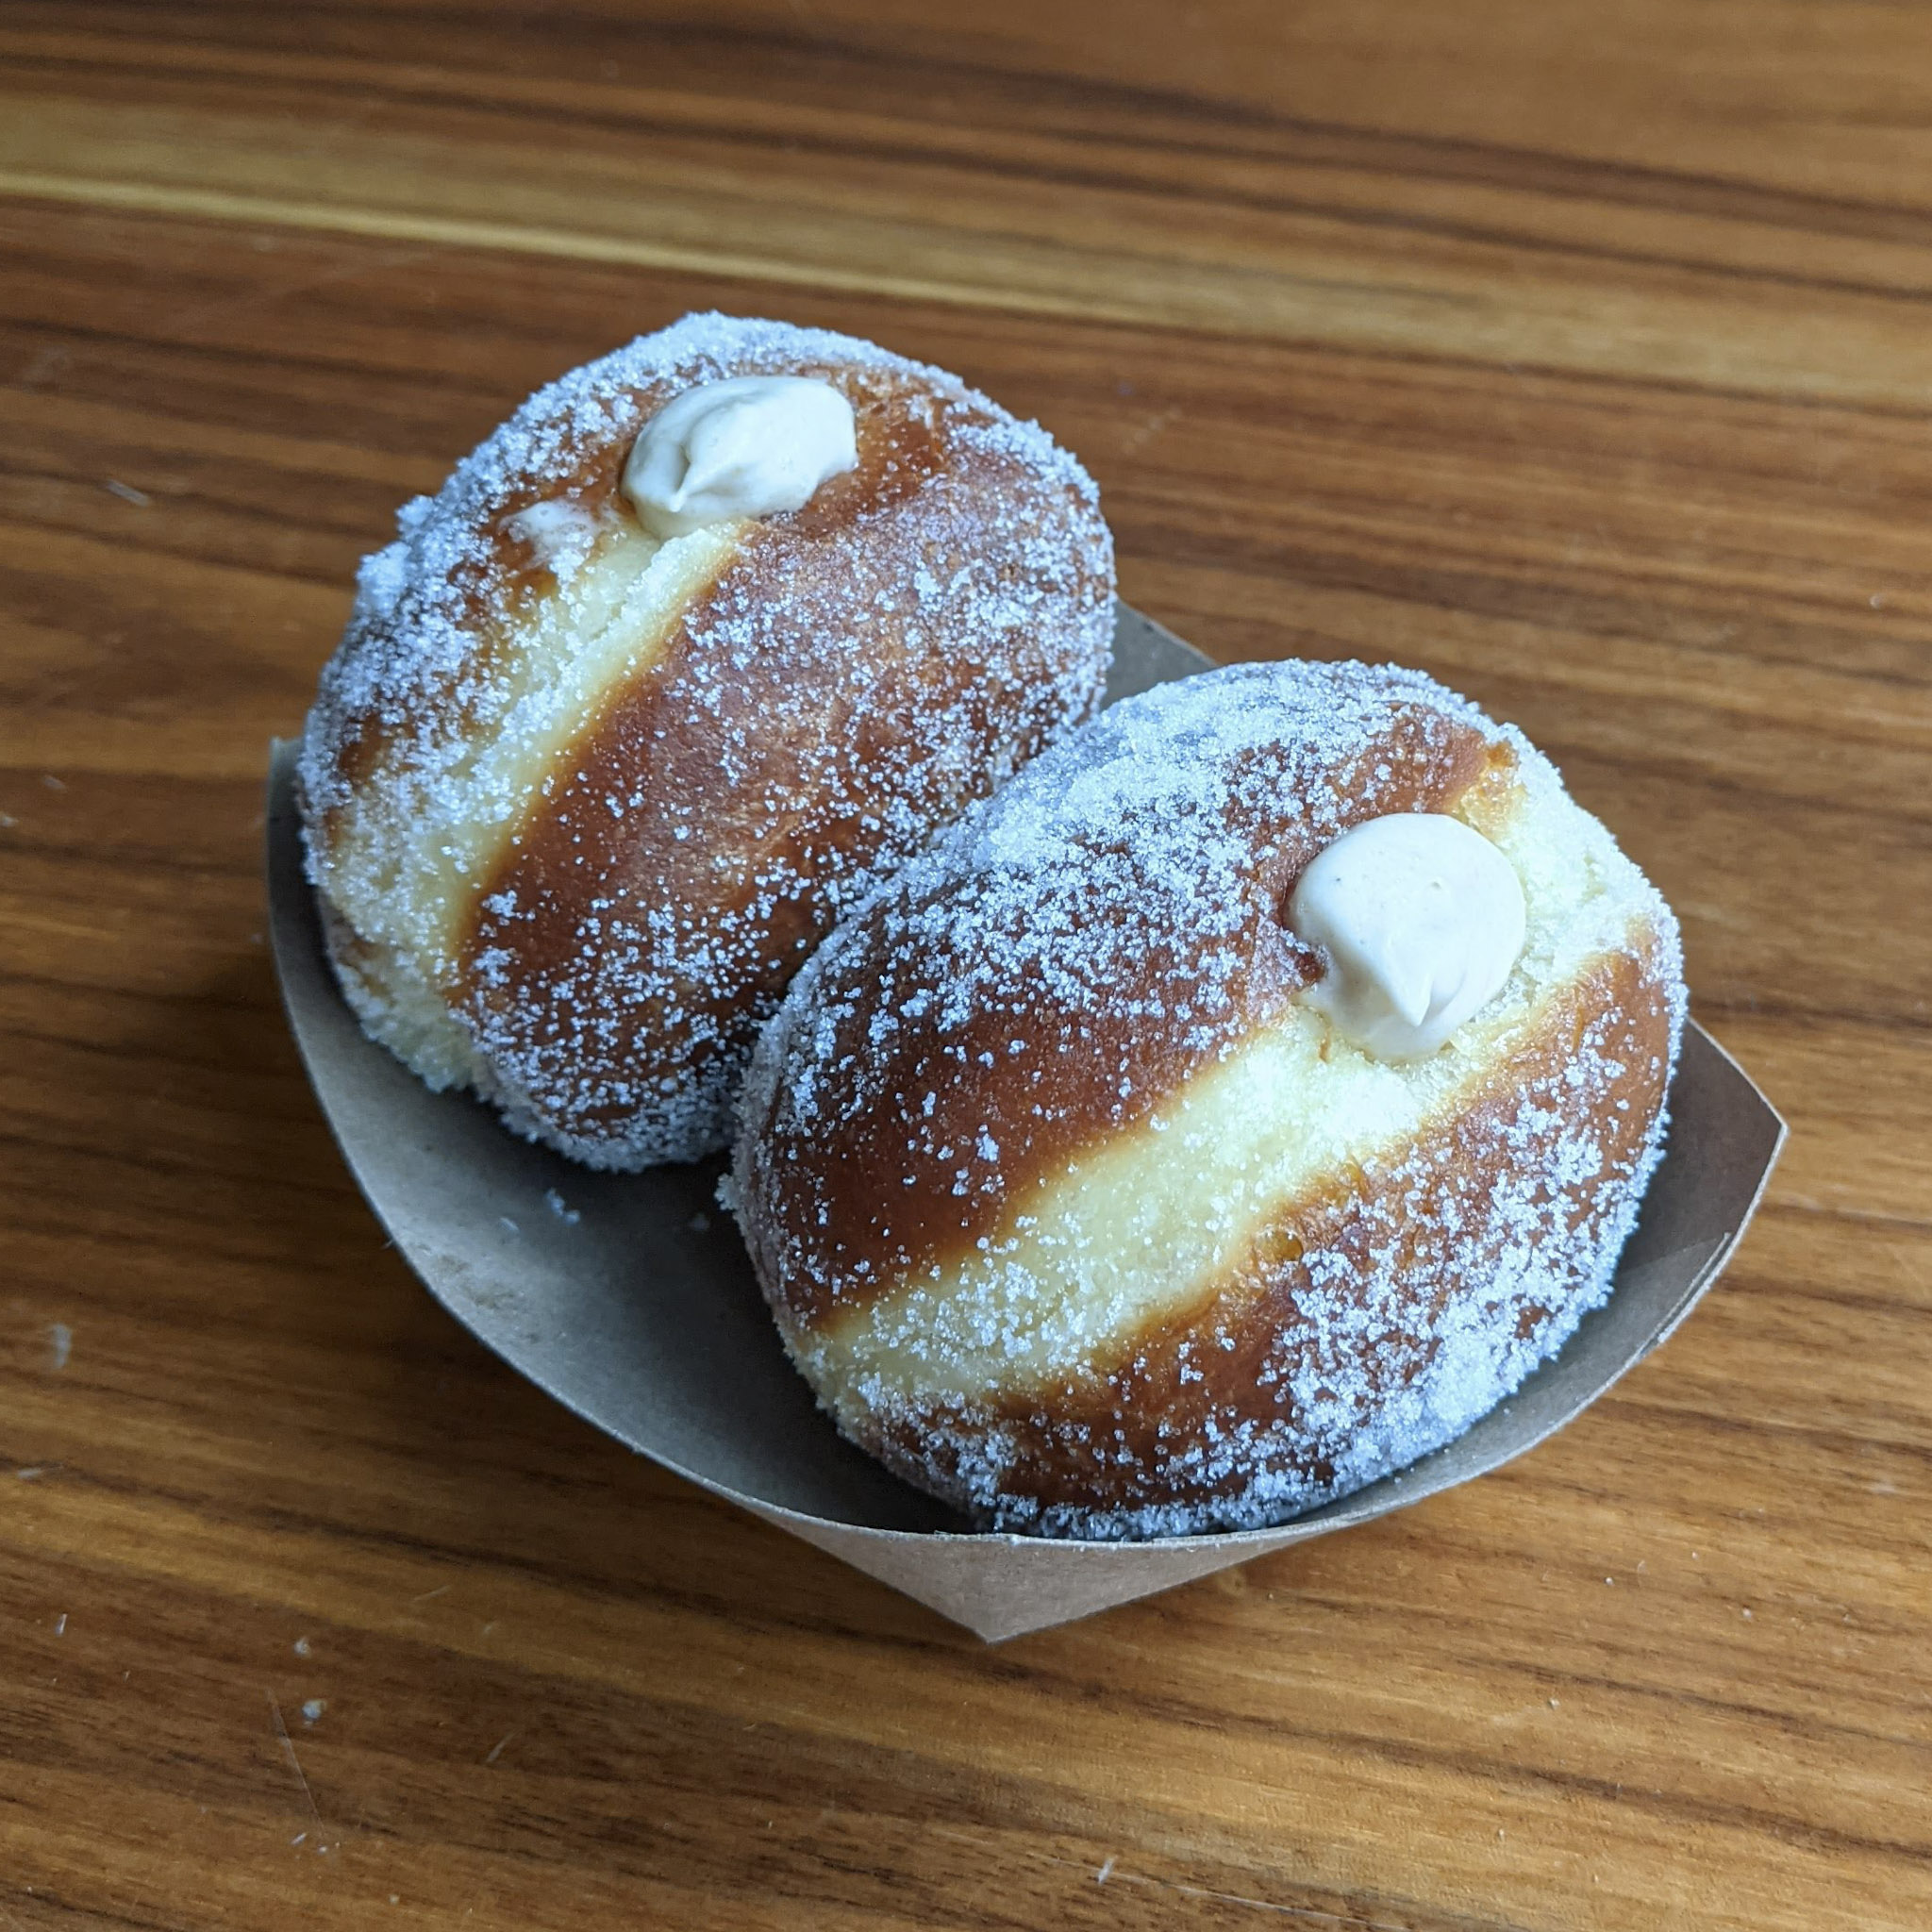 Two sugar-dusted donuts rest in a white cardboard bowl with pats of homemade butter melting atop them.